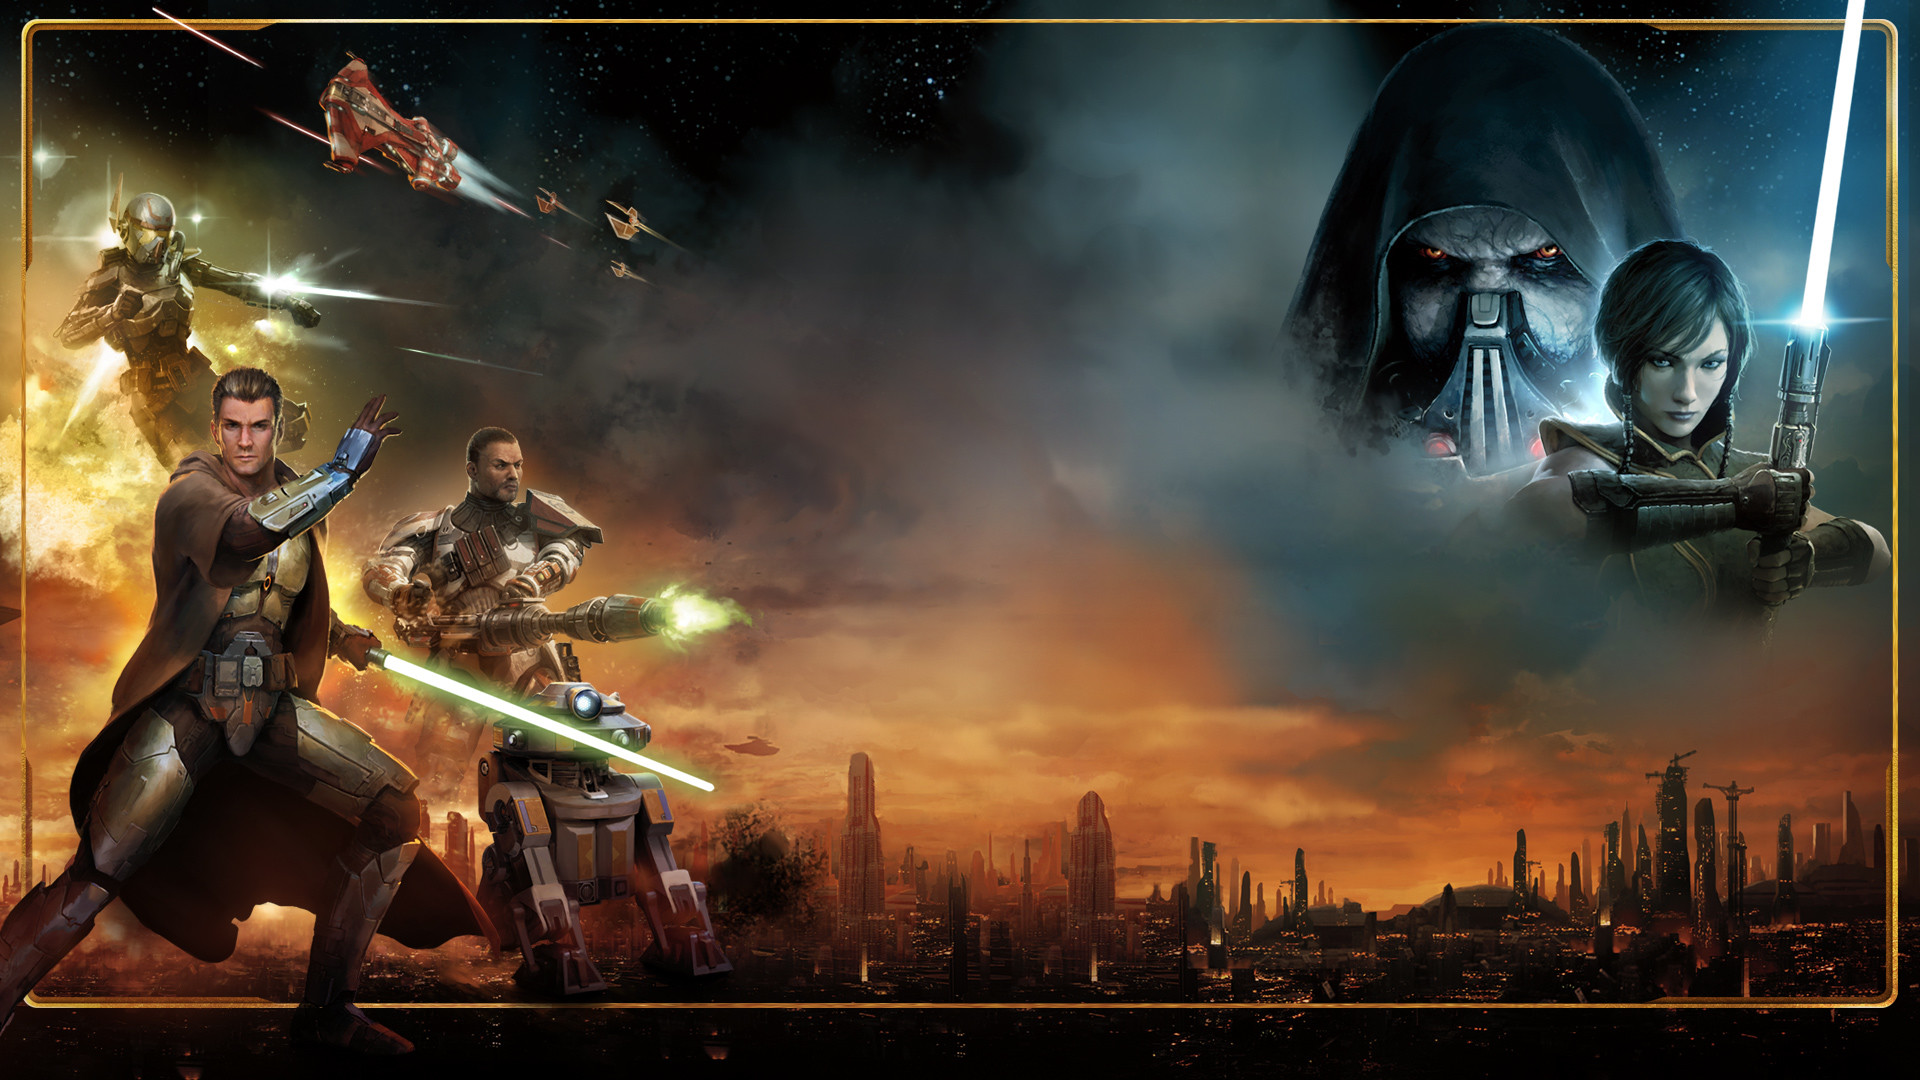 Swtor Wallpaper 74 Pictures